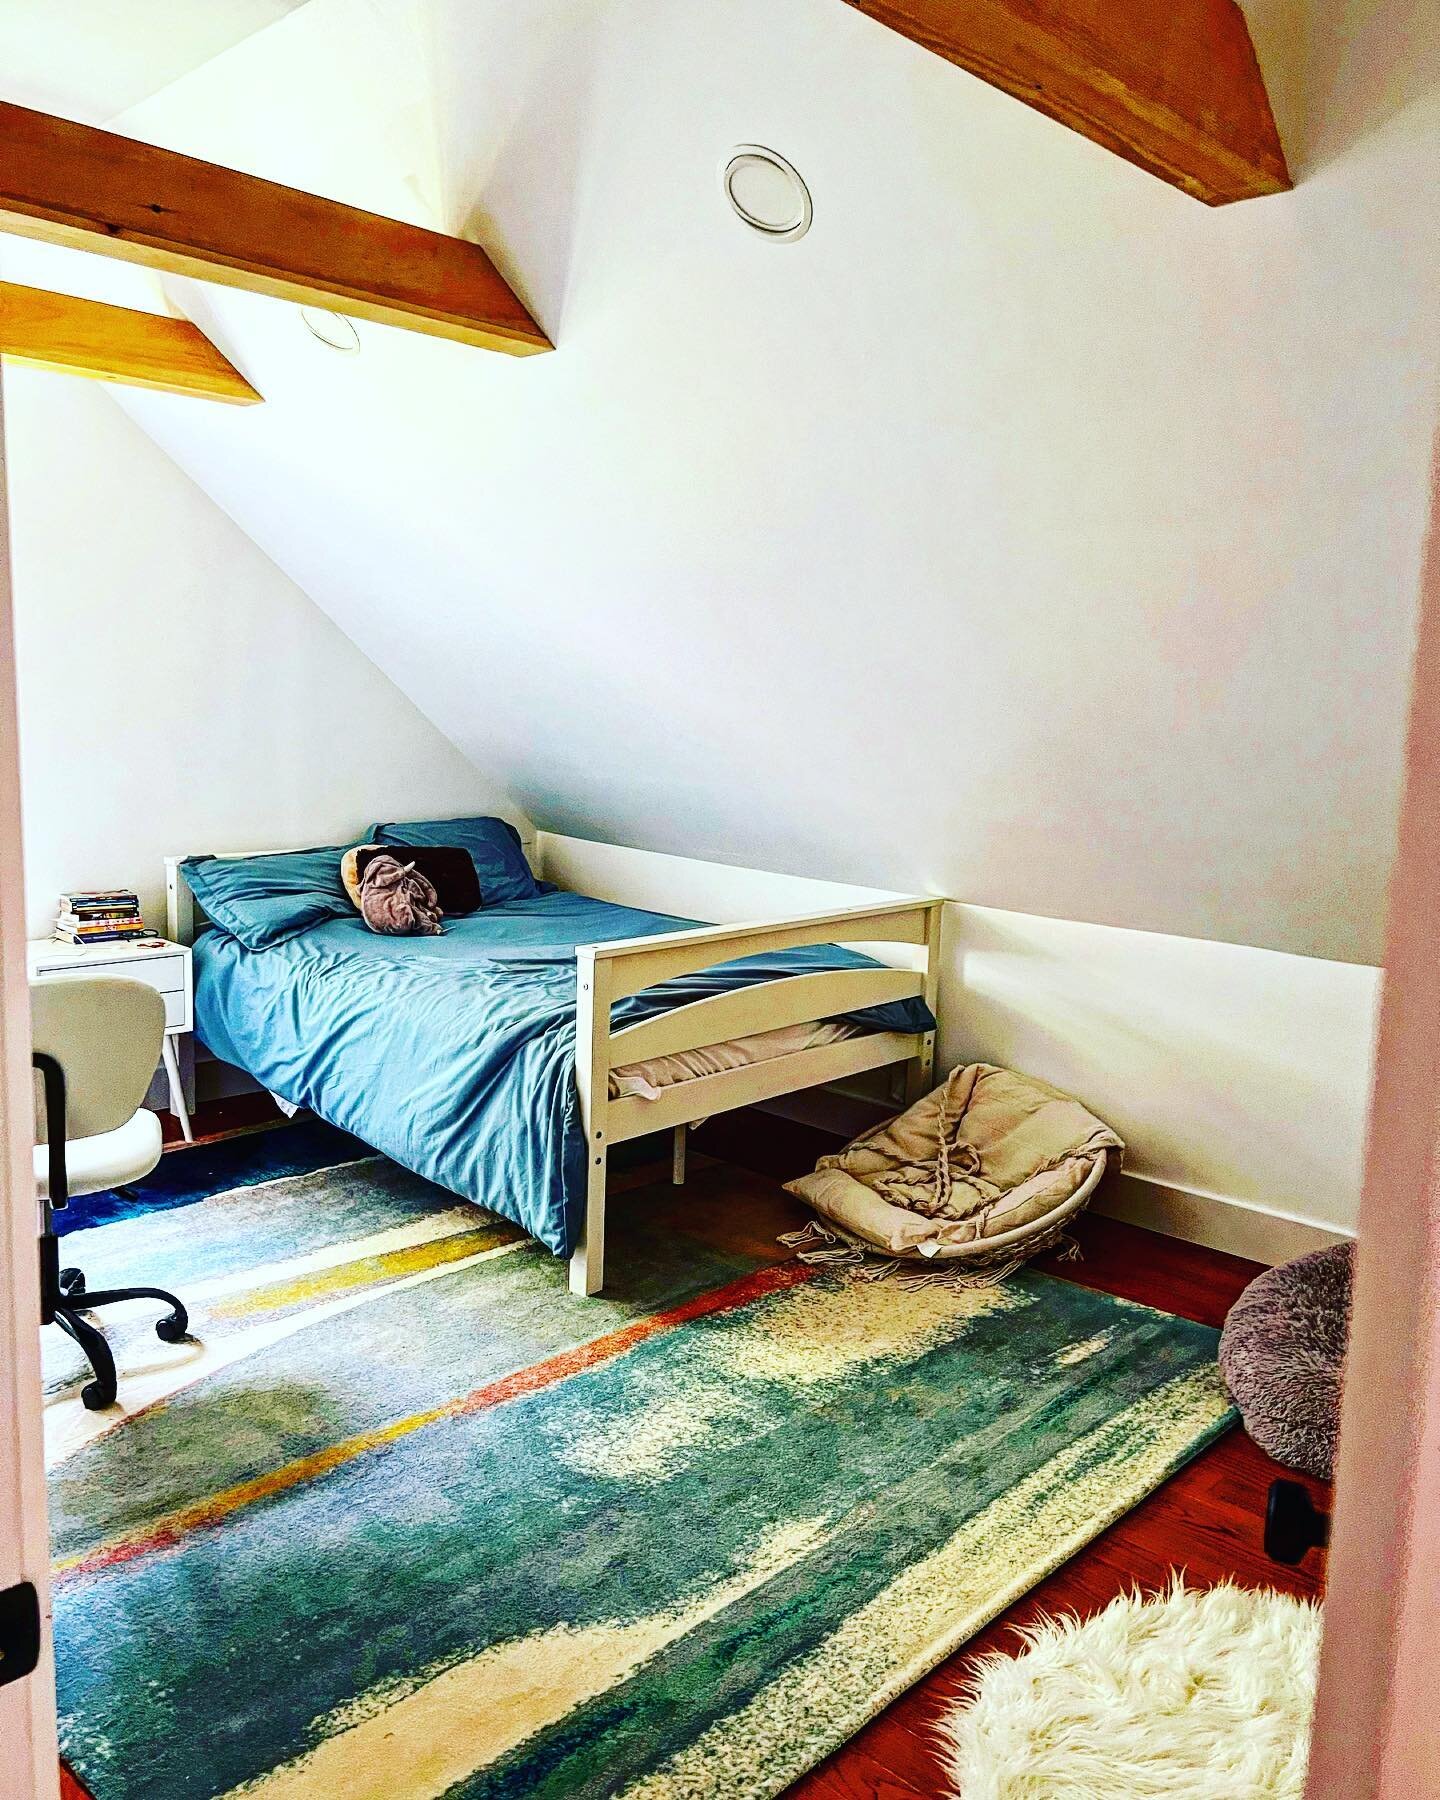 Finished up a bedroom renovation in Rhinebeck recently. Updated the flooring to 2 1/4 red oak, vaulted the ceilings and re-insulated with much better insulation than existing. Wrapped the collar ties in pine and had @jims_plumbing_  work some magic a